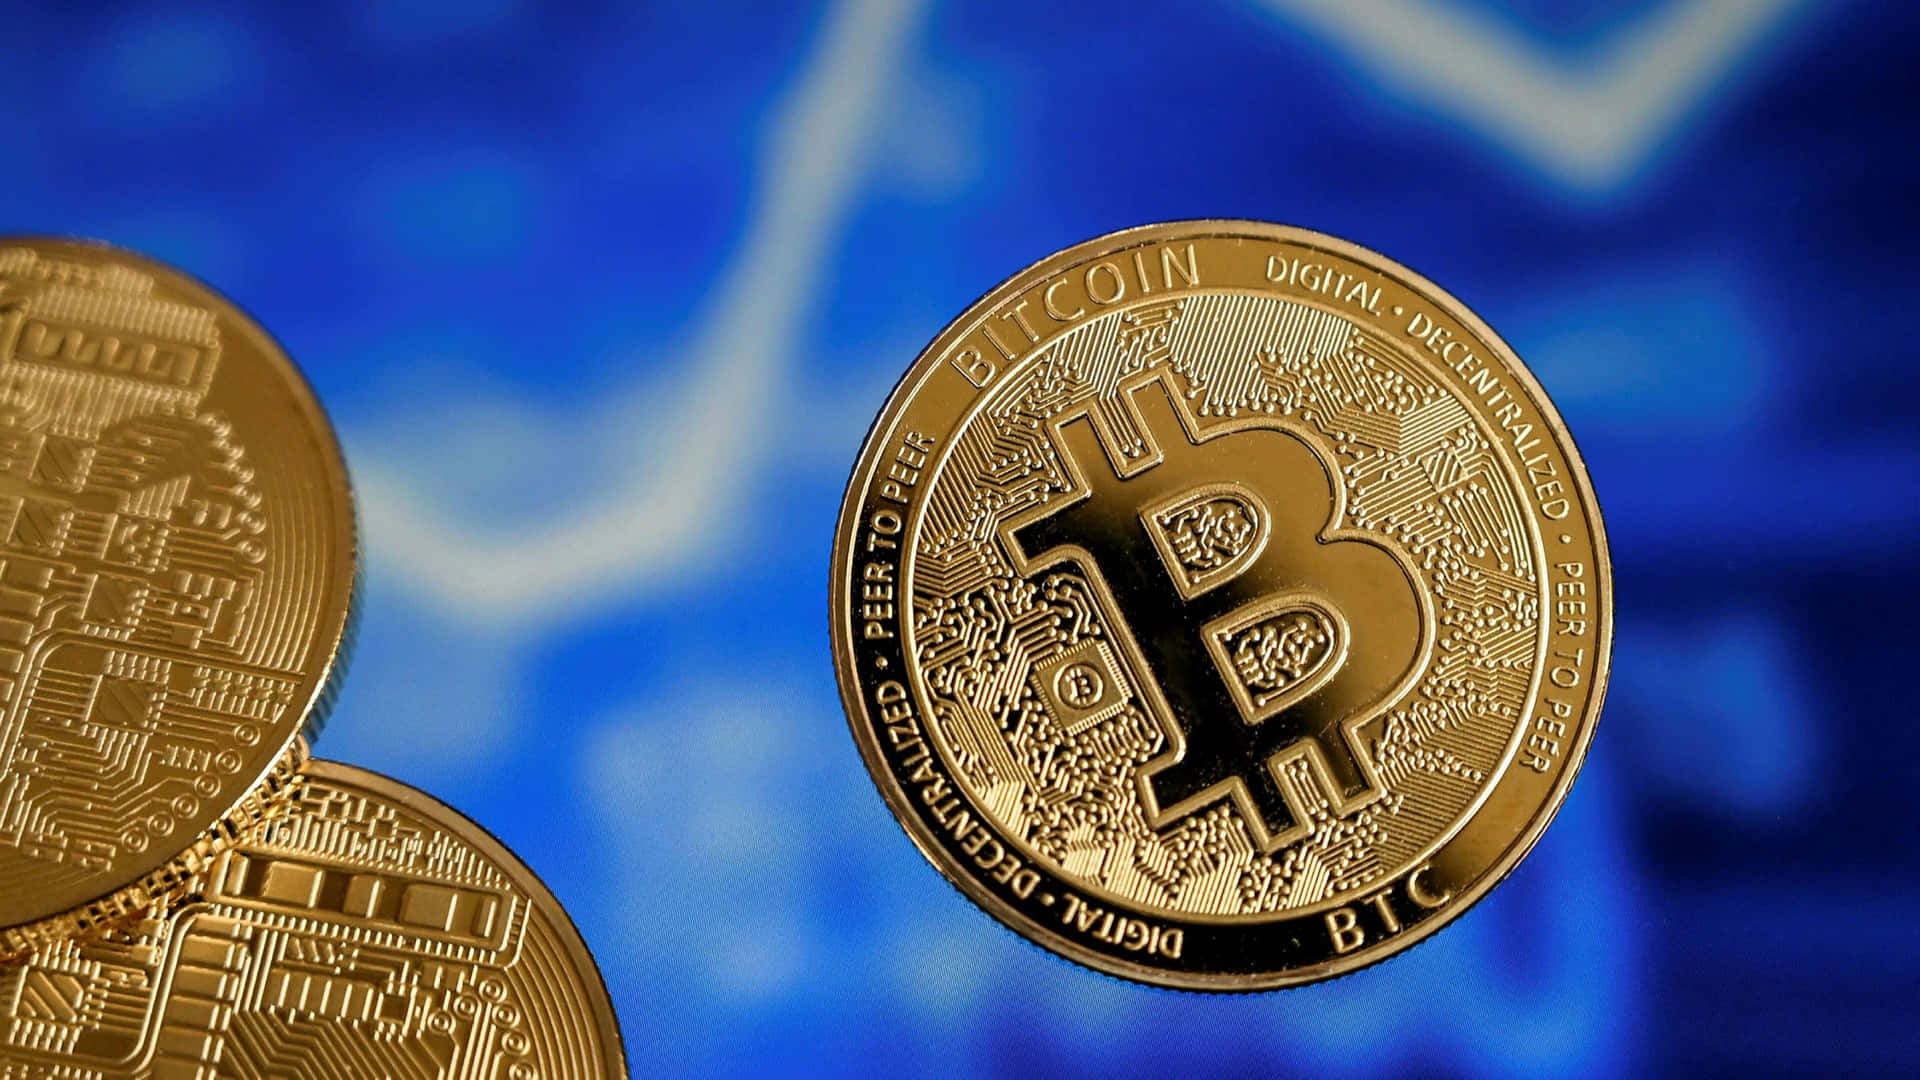 Bitcoin cryptocurrency revolutionising the way we think about money